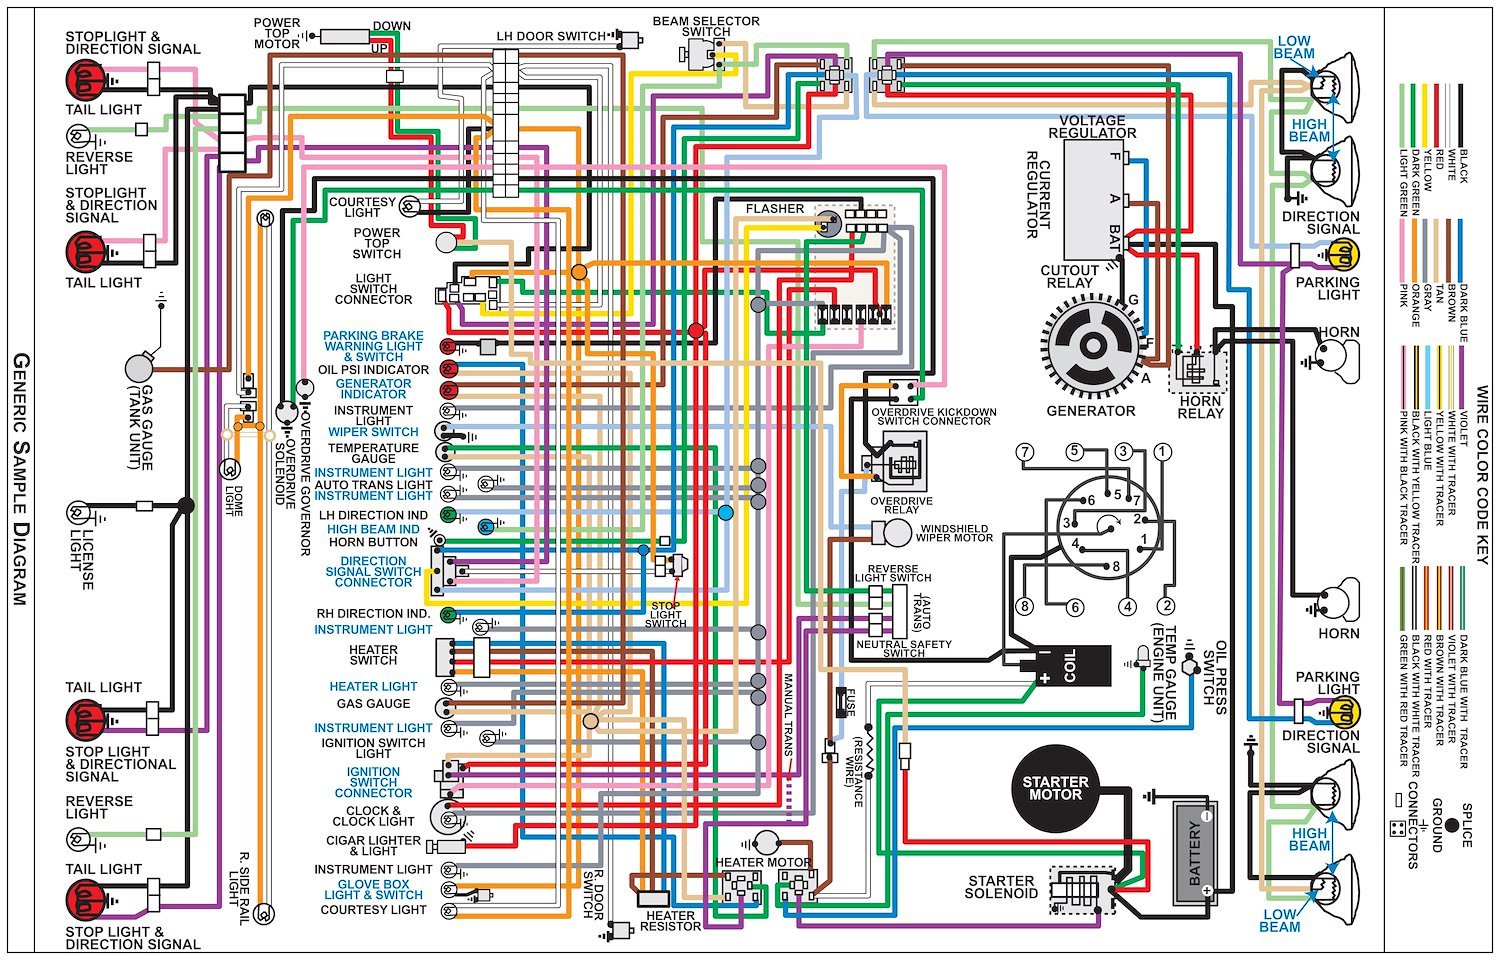 Wiring Diagram for 1967 Chevy Camaro (All Models), 11 in. x 17 in., Laminated